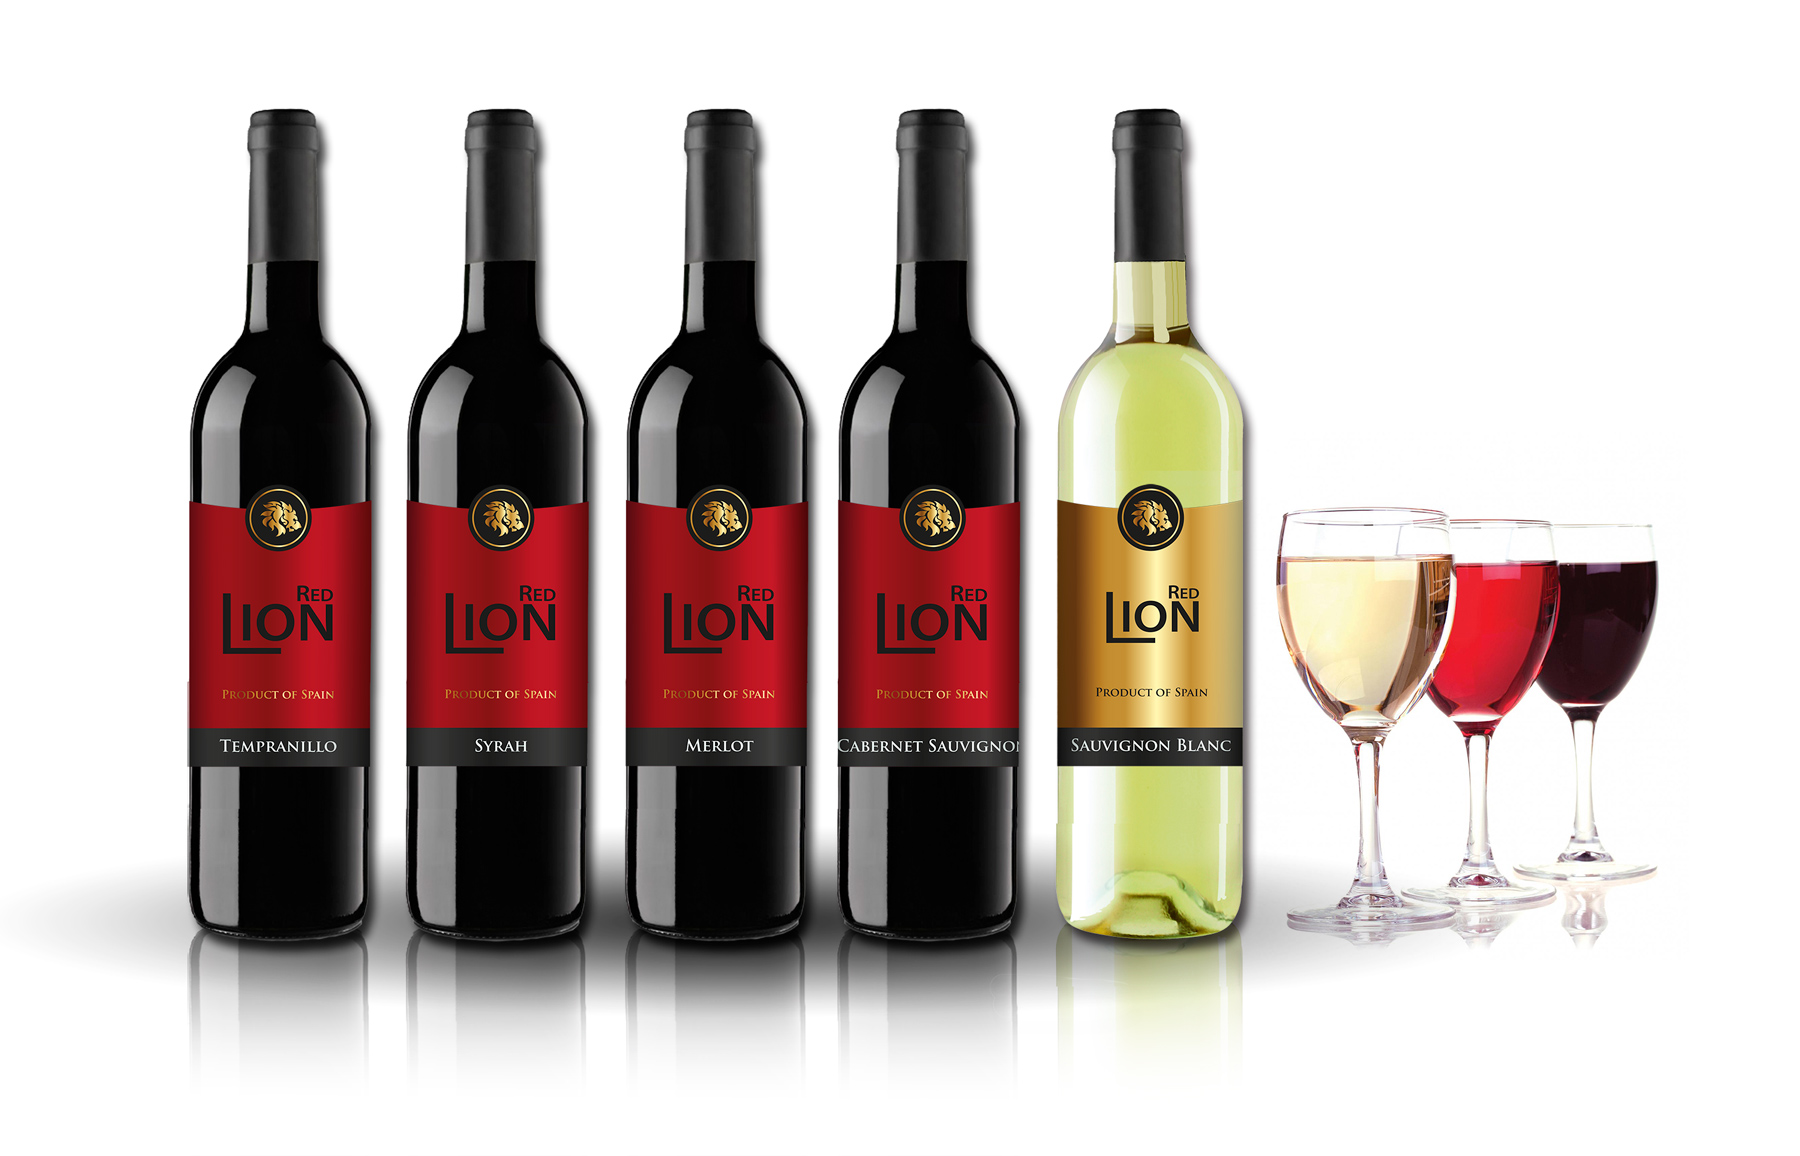 Portfolio of design works for the creation of logos, brands, catalogs, labels and packaging of a Spanish wine producing and exporting company